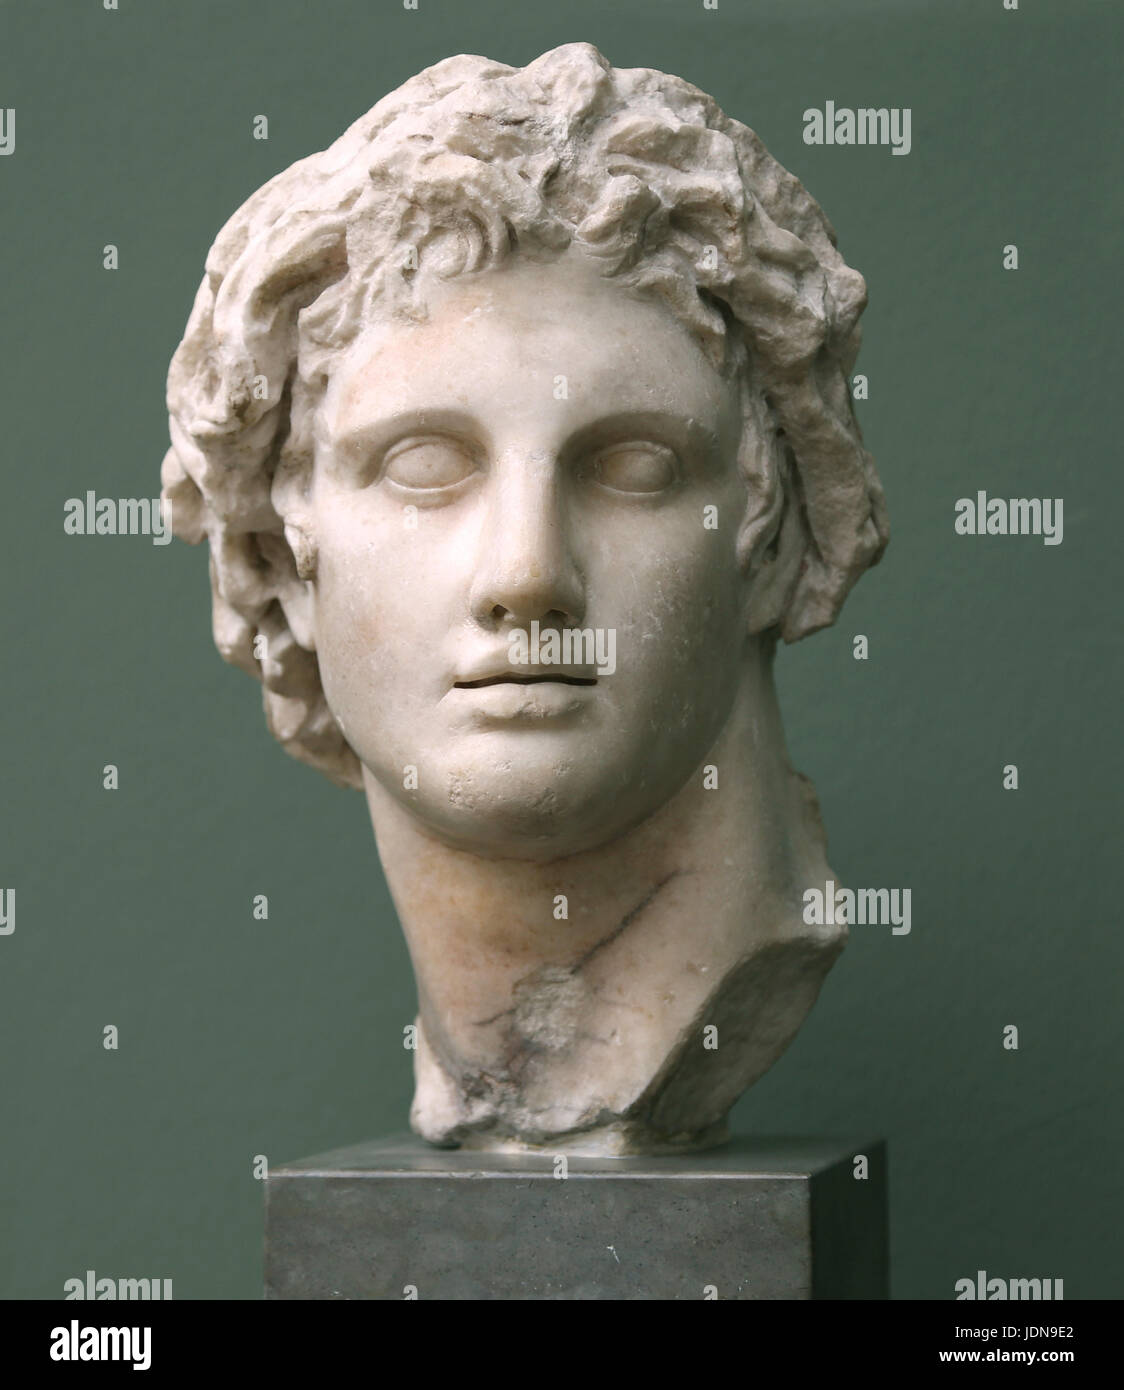 Alexander the Great (356 -323 BC). King of Macedonia. Marble bust from Alexandria, copy of a portrait of Lisipo sculpture  ca. 330 BC. Stock Photo